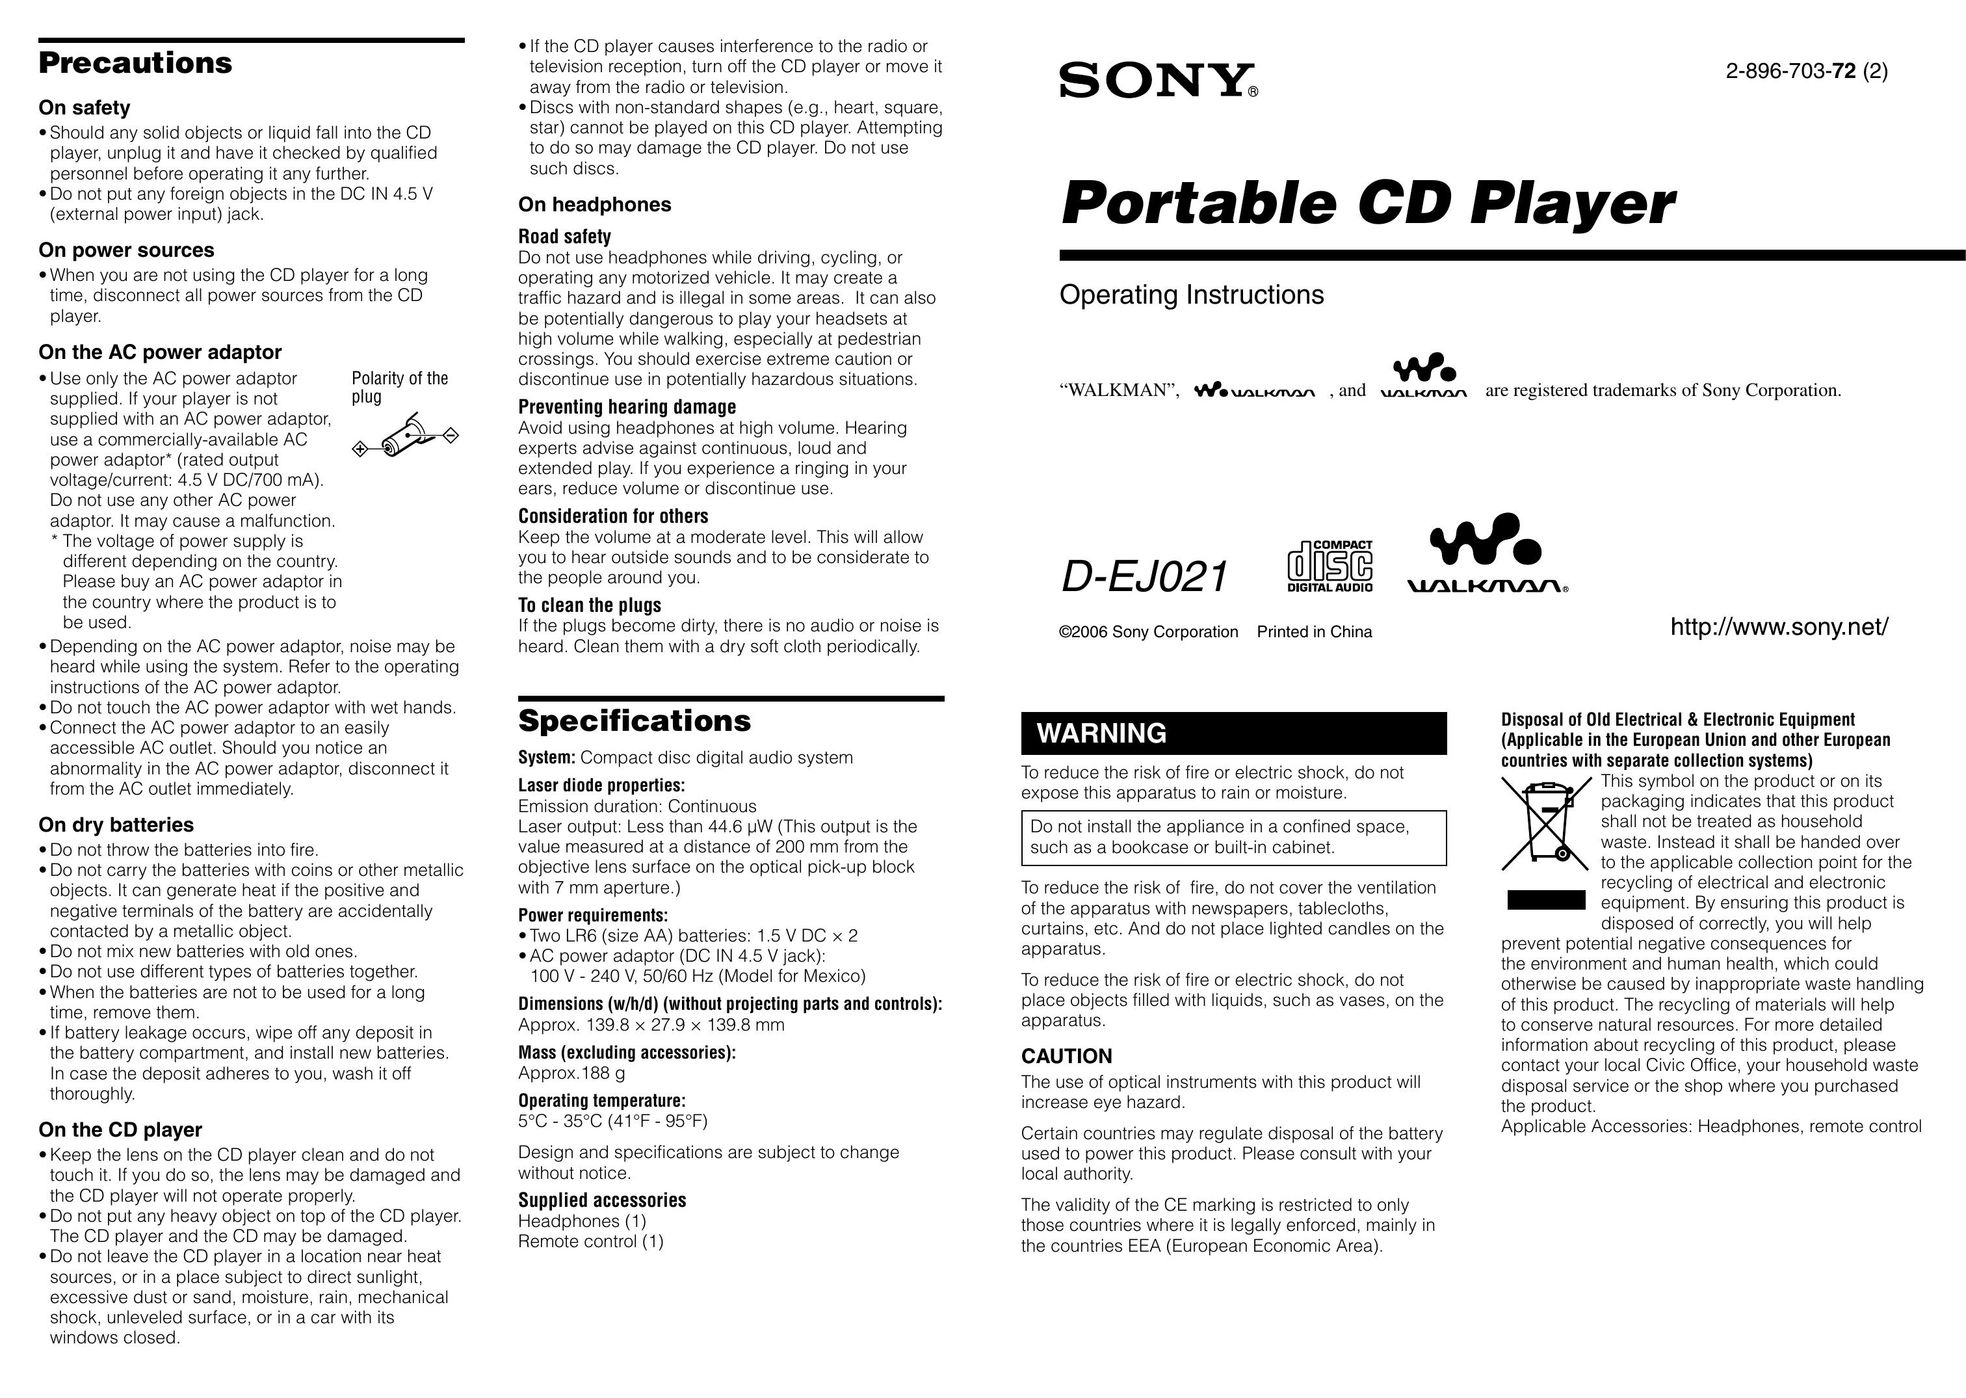 Sony 2-896-703-72 (2) Portable CD Player User Manual